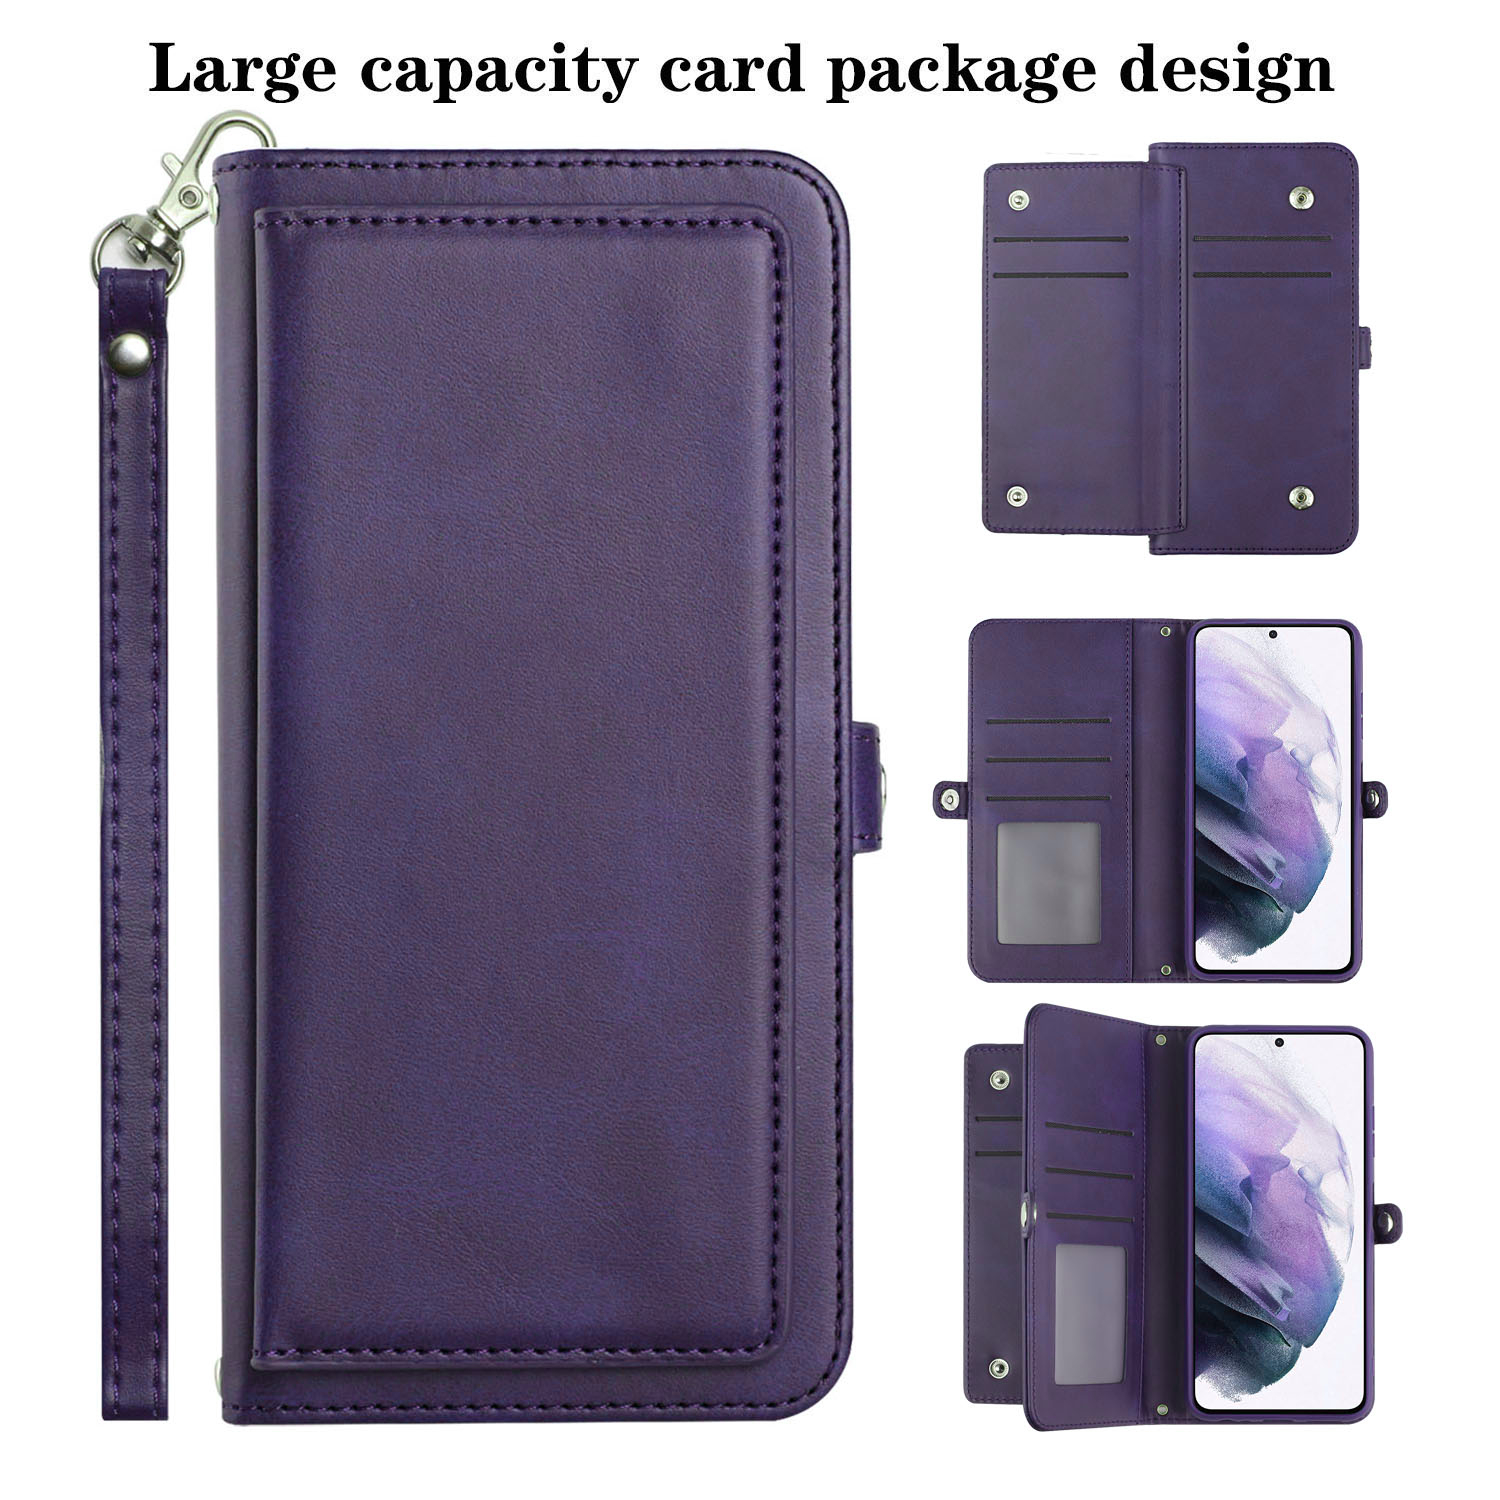 Premium PU Leather Folio Wallet Front Cover Case for Galaxy A33 5G (Purple)